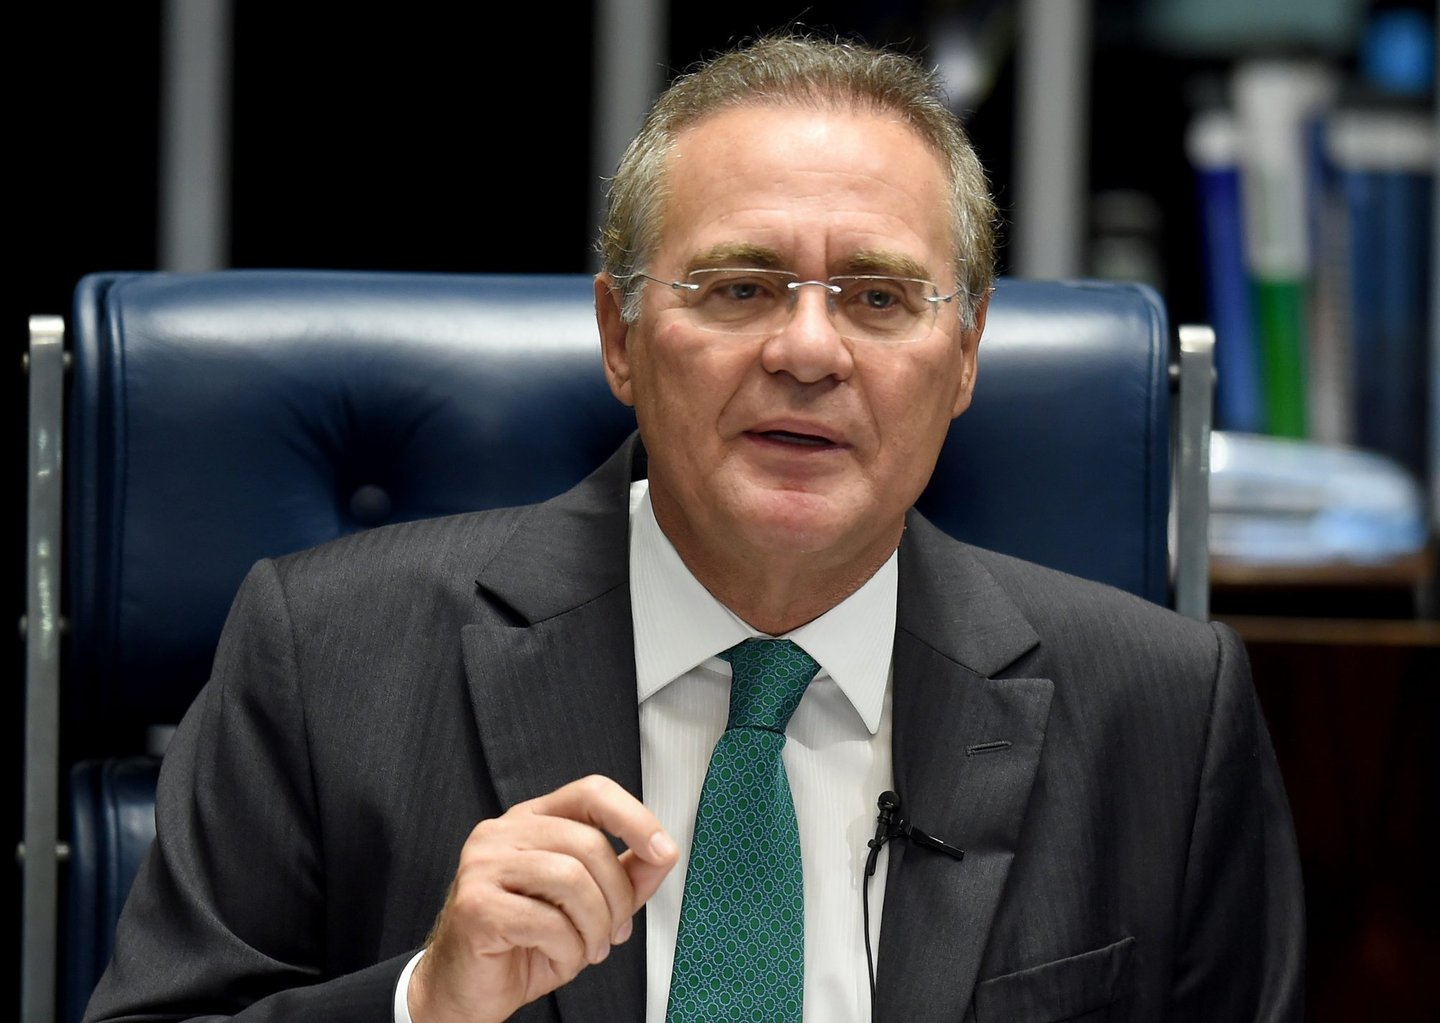 The president of the Senate Renan Calheiros attends a debate of a vote on suspending President Dilma Rousseff and launching an impeachment trial, in Brasilia on May 11, 2016. Brazil's Senate opened debate Wednesday ahead of a vote on suspending President Dilma Rousseff and launching an impeachment trial that could bring down the curtain on 13 years of leftist rule in Latin America's biggest country. Even allies of Rousseff, 68, said she had no chance of surviving the vote. / AFP / EVARISTO SA (Photo credit should read EVARISTO SA/AFP/Getty Images)